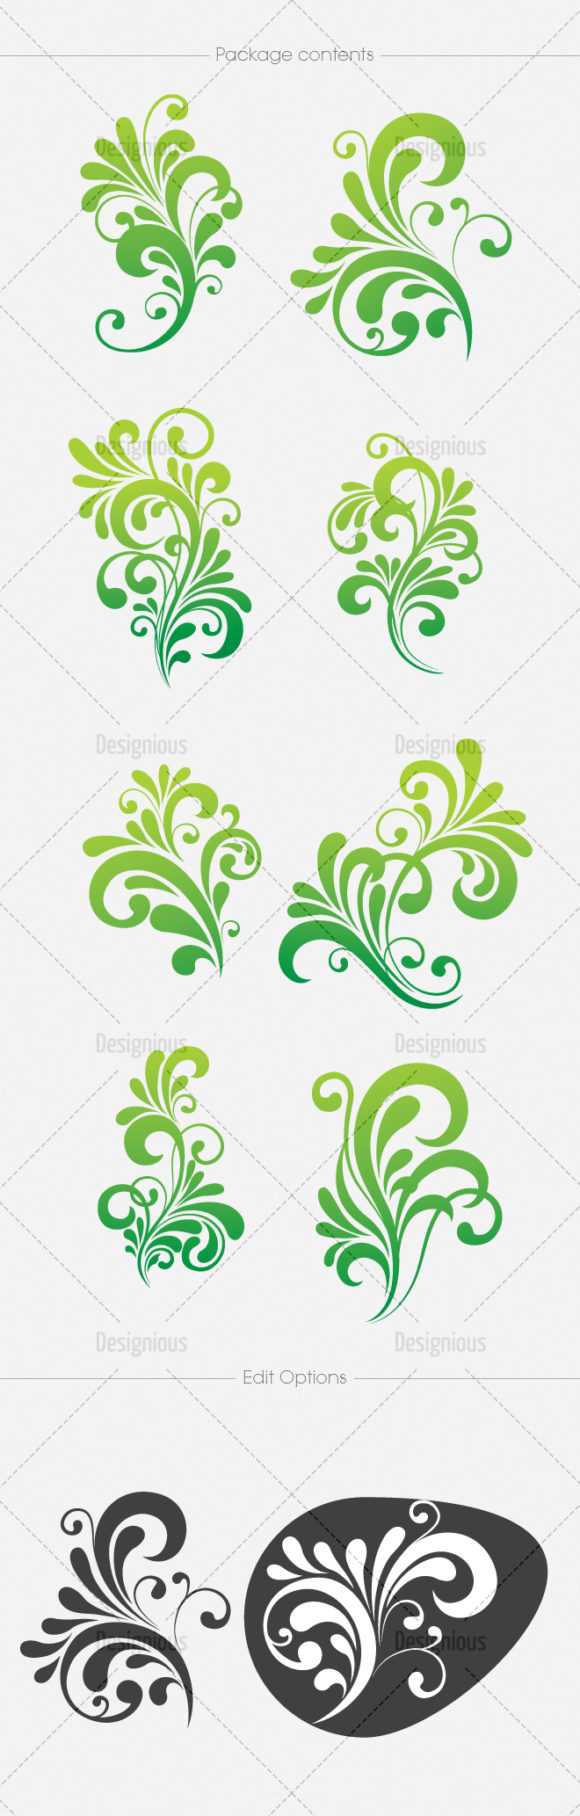 Floral Vector Pack 127 2